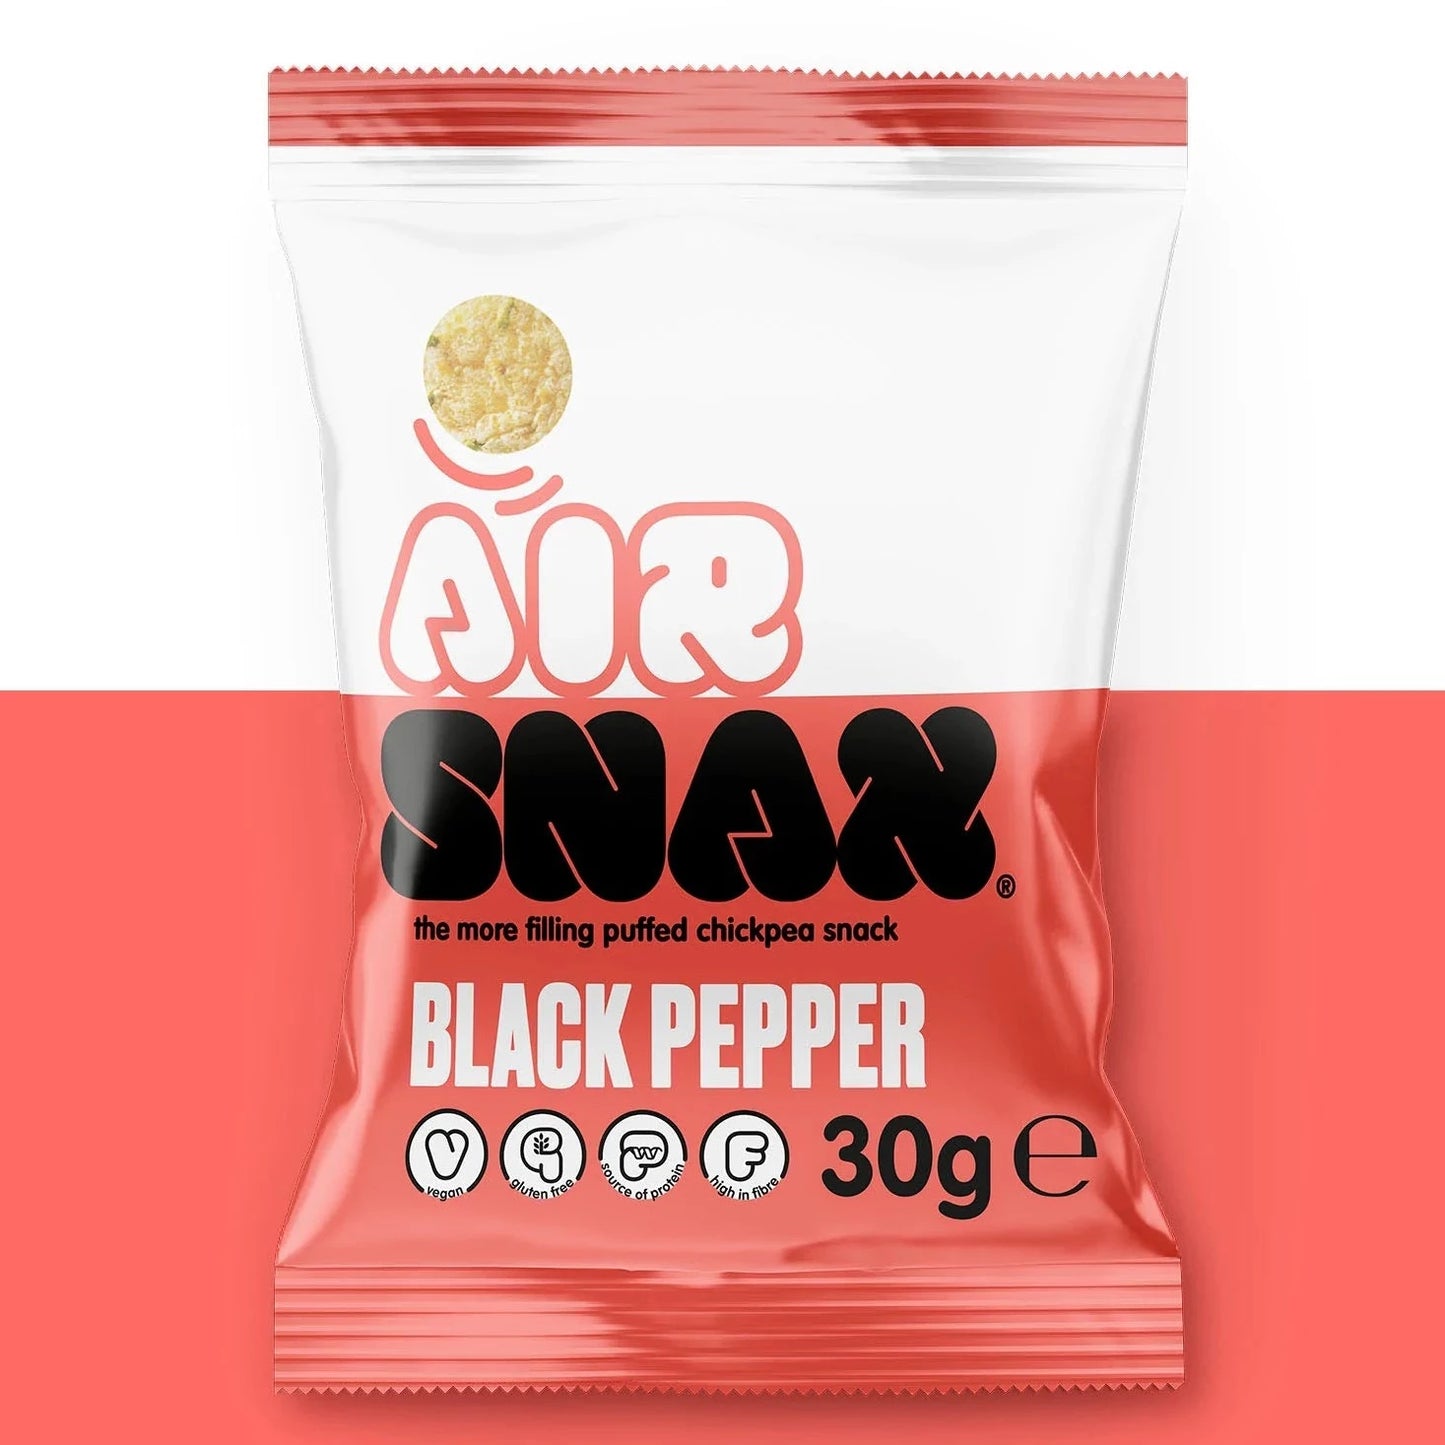 
                  
                    AIR SNAX Black Pepper Chickpea Vegan Snack. Gluten free, vegan, source of protein and high in fibre
                  
                